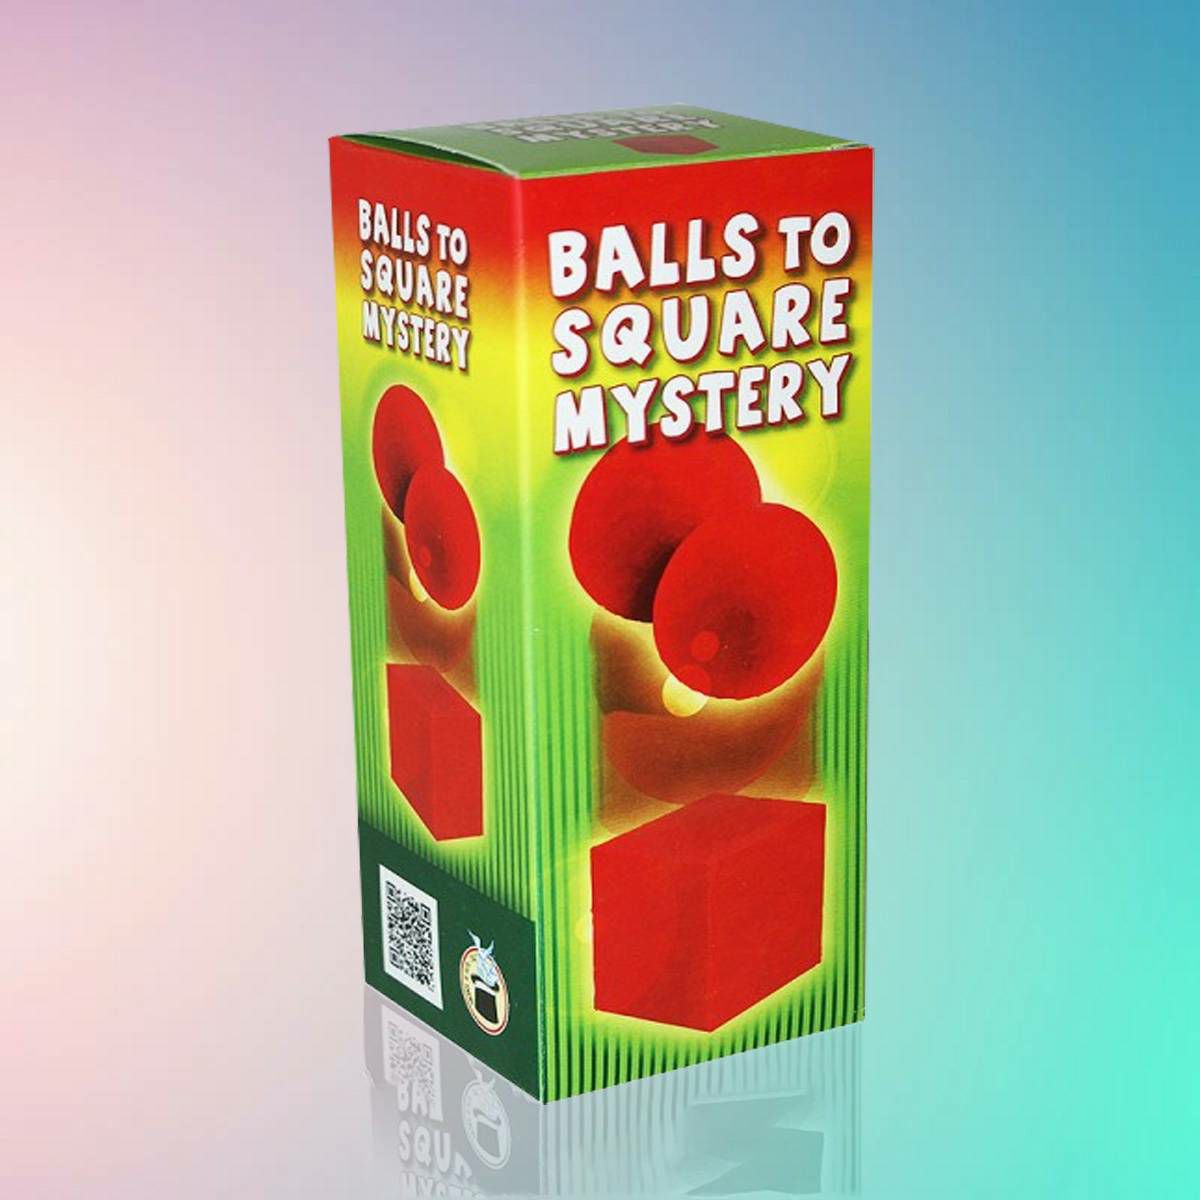 Balls to square mystery